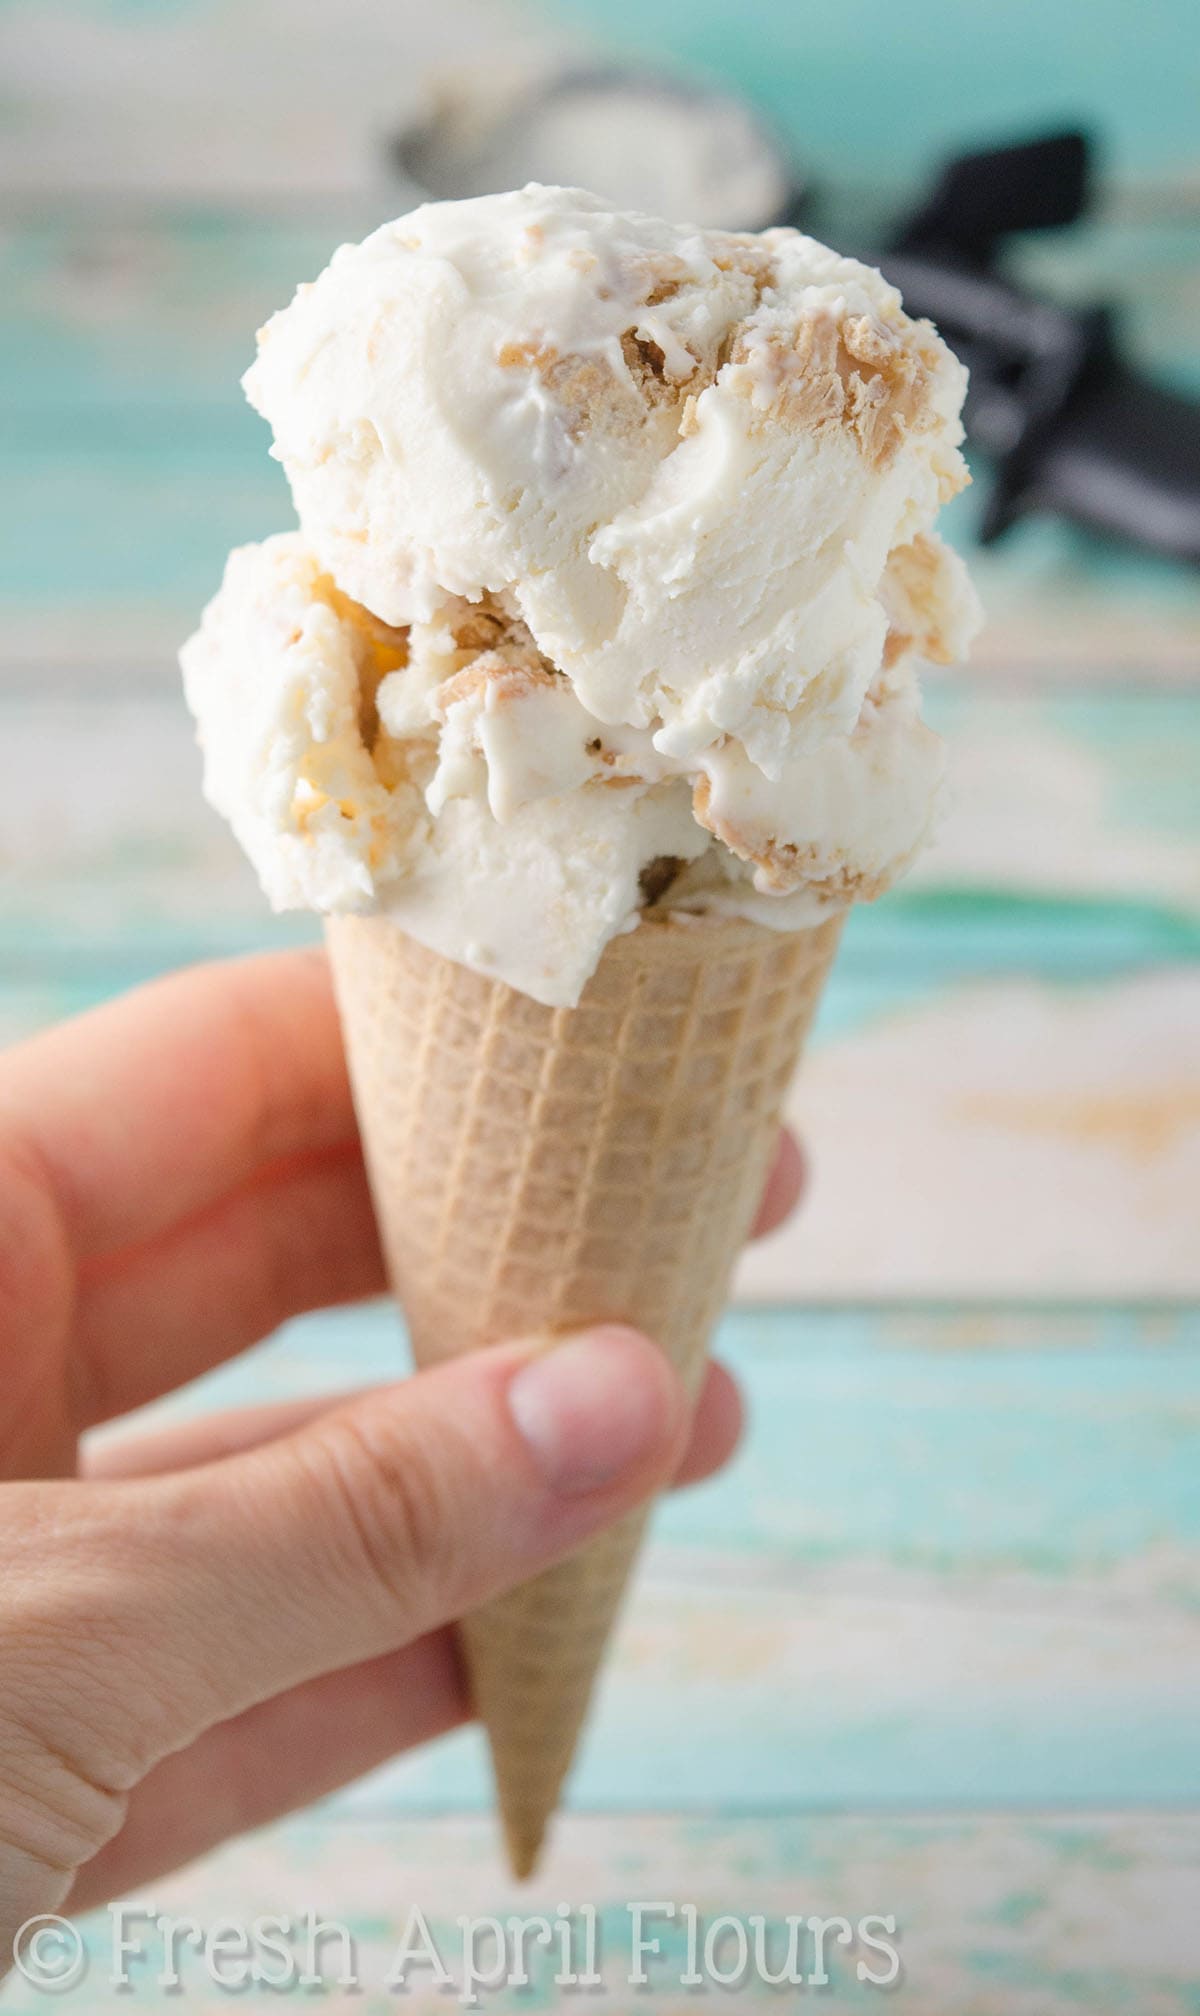 A hand holding an ice cream cone with two scoops of peanut butter ripple ice cream on top. 